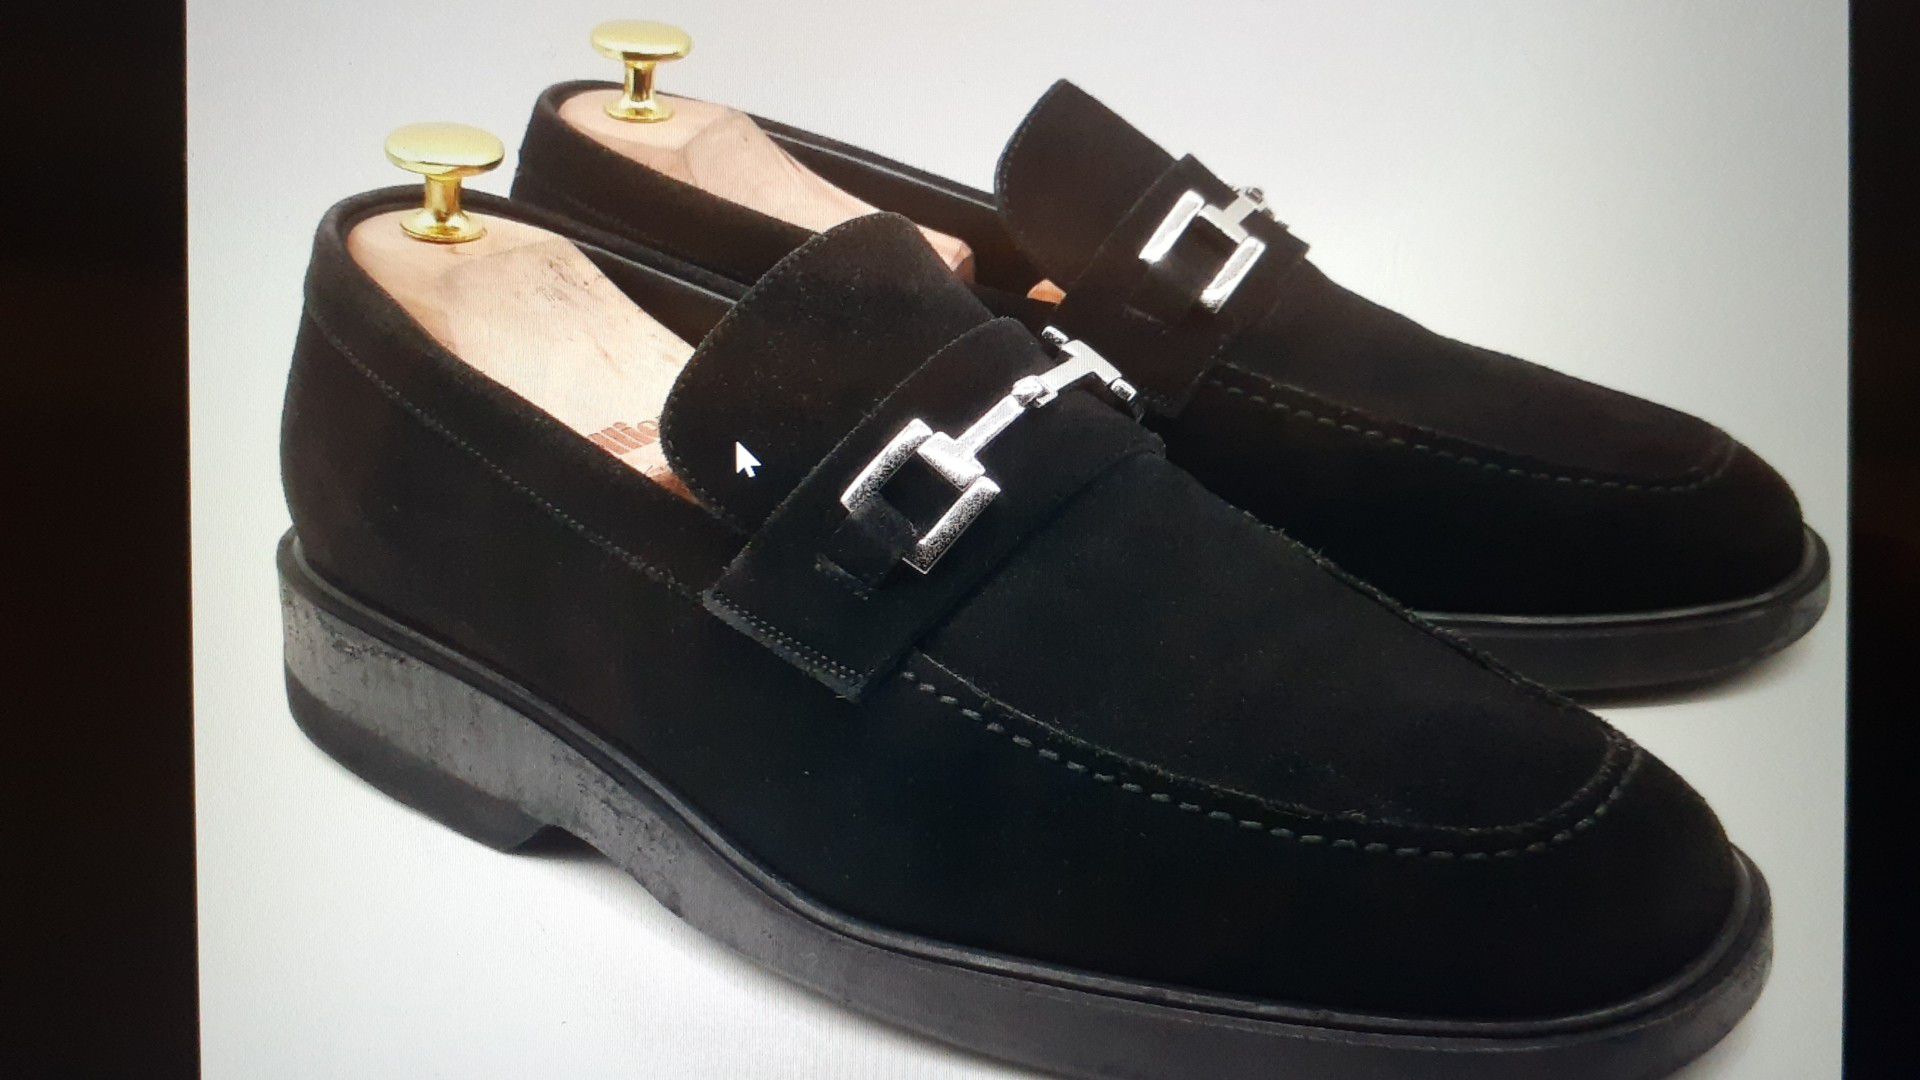 GUCCI Men's Black Suede Bit Loafers Slip On Dress Shoes Size US 10 E $540 Italy